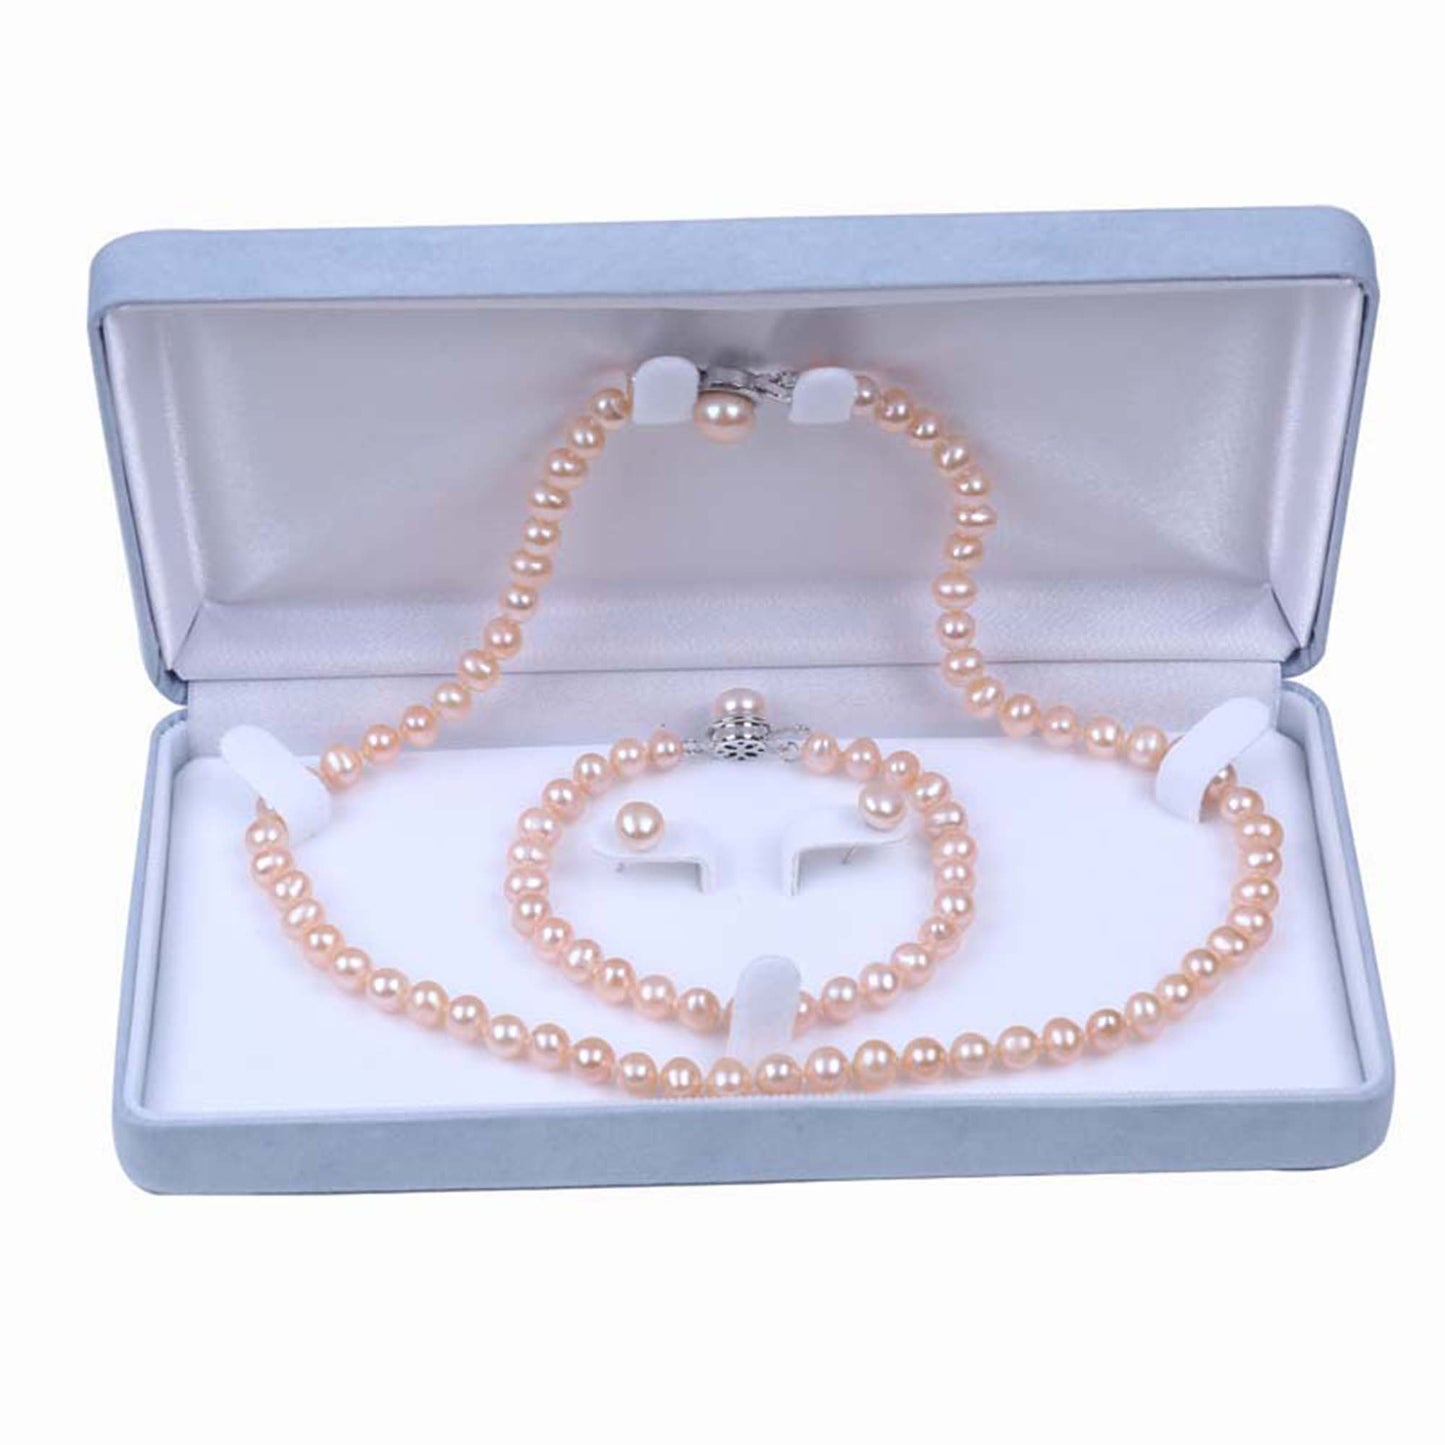 Excellent quality 3 piece freshwater pearl set in elegant gift box - Providence silver gold jewelry usa